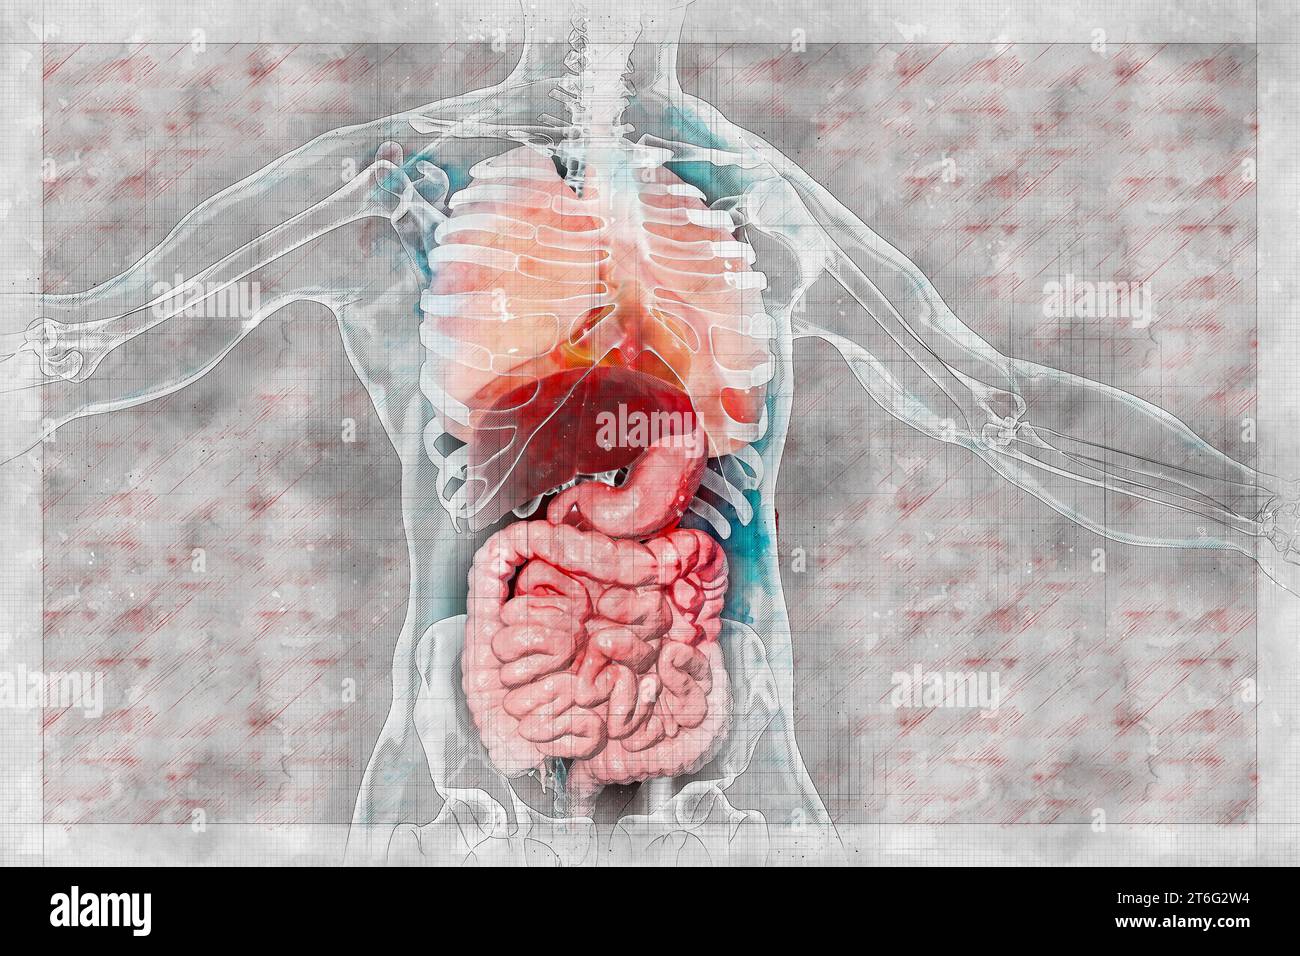 Human body anatomy, respiratory and digestive system, 3D illustration in sketch scientist notes style Stock Photo